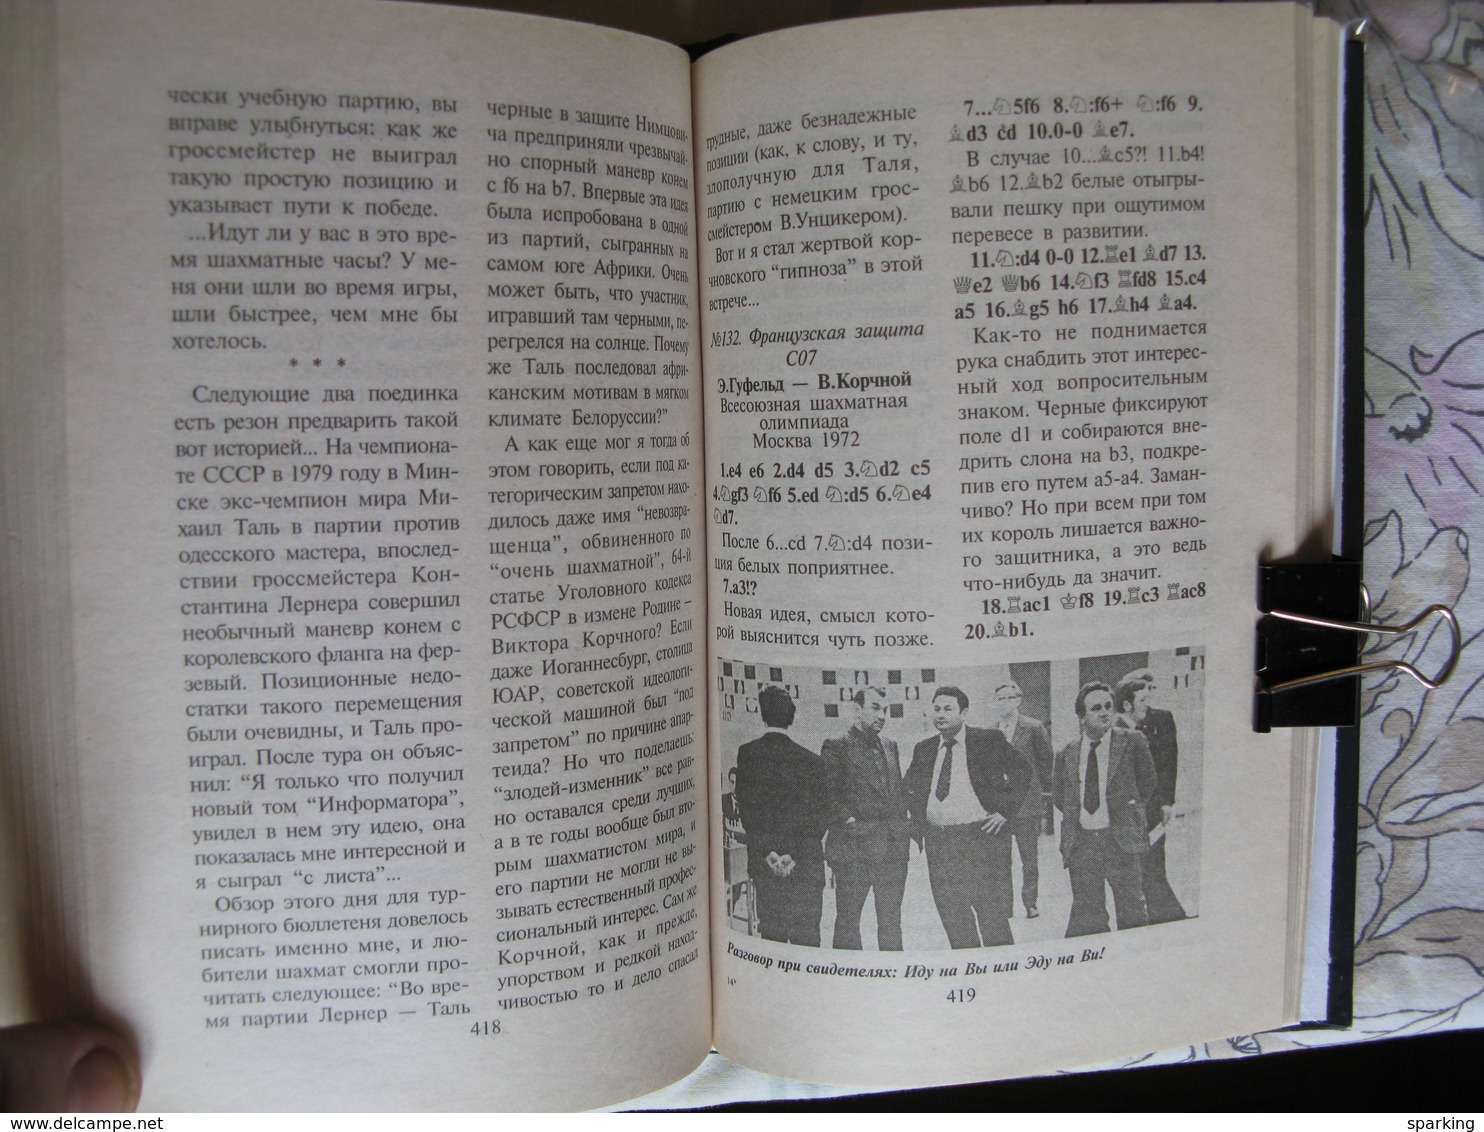 Chess. 2003. Gufeld, Edward. 1000 episodes from the life of grandmaster. Russian book.